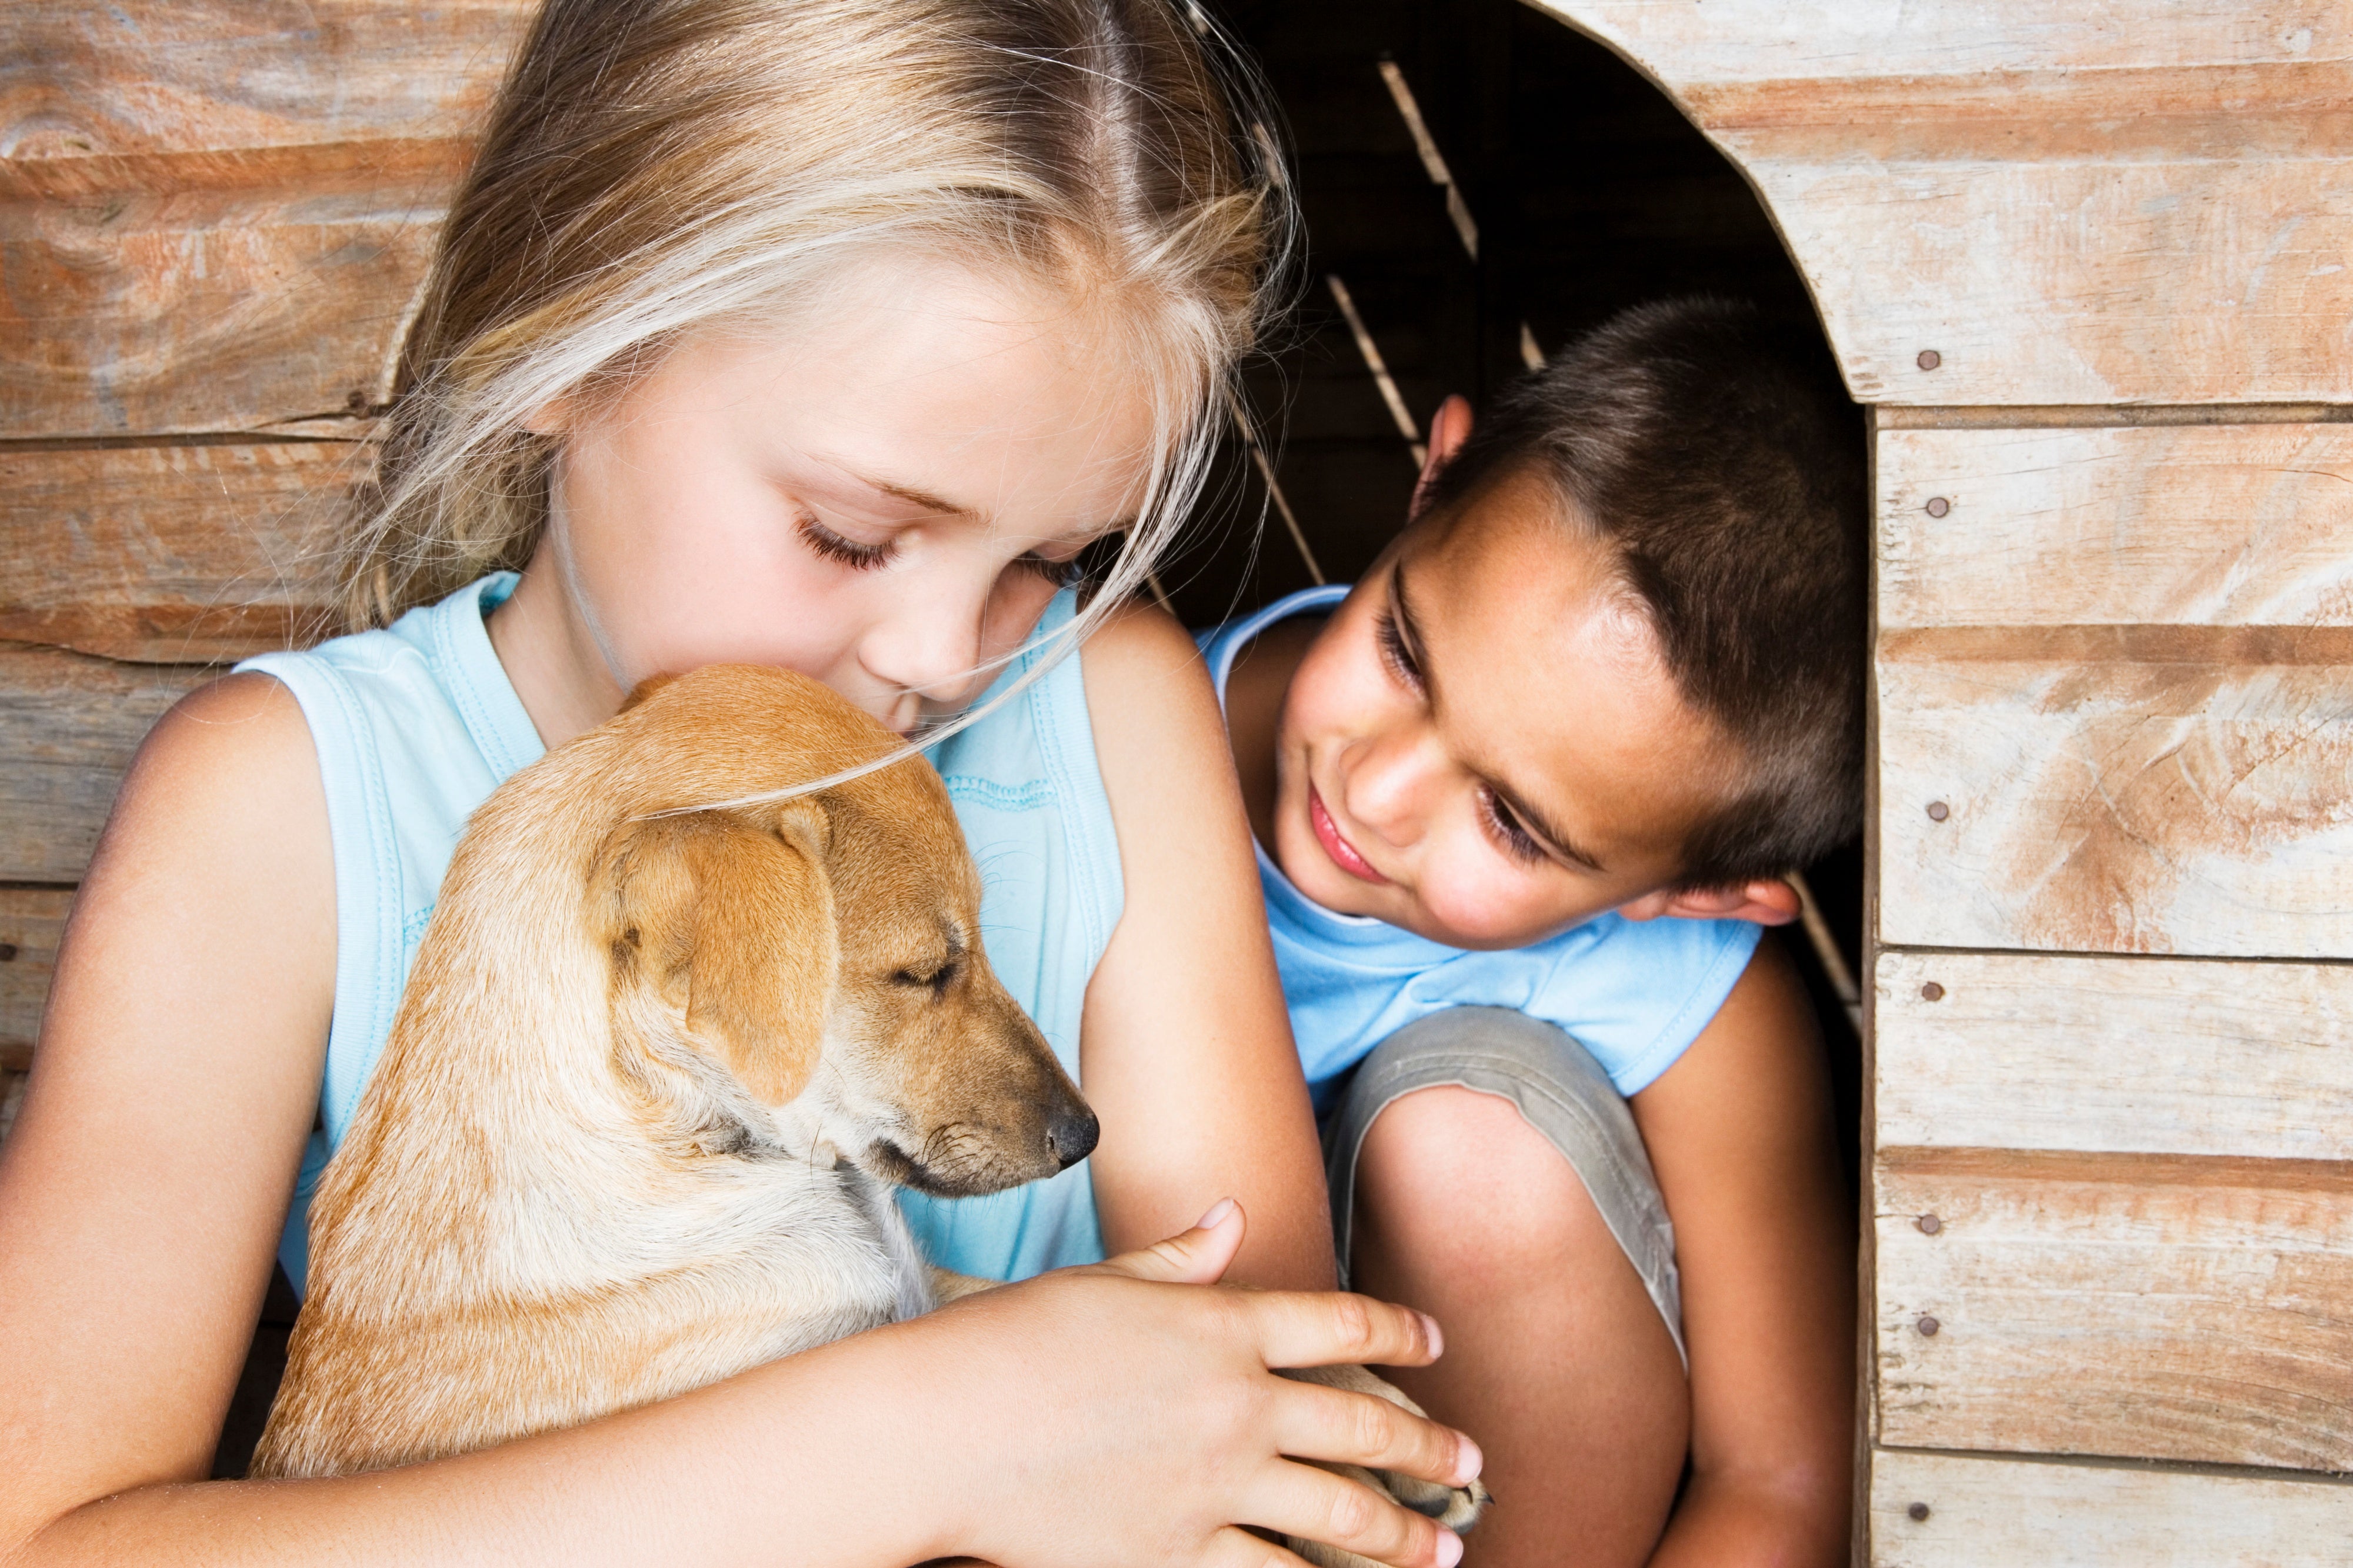 Give a talk about pets. Фонд забытые животные. Kids with Pets. Talks with animals. Family and Pets.